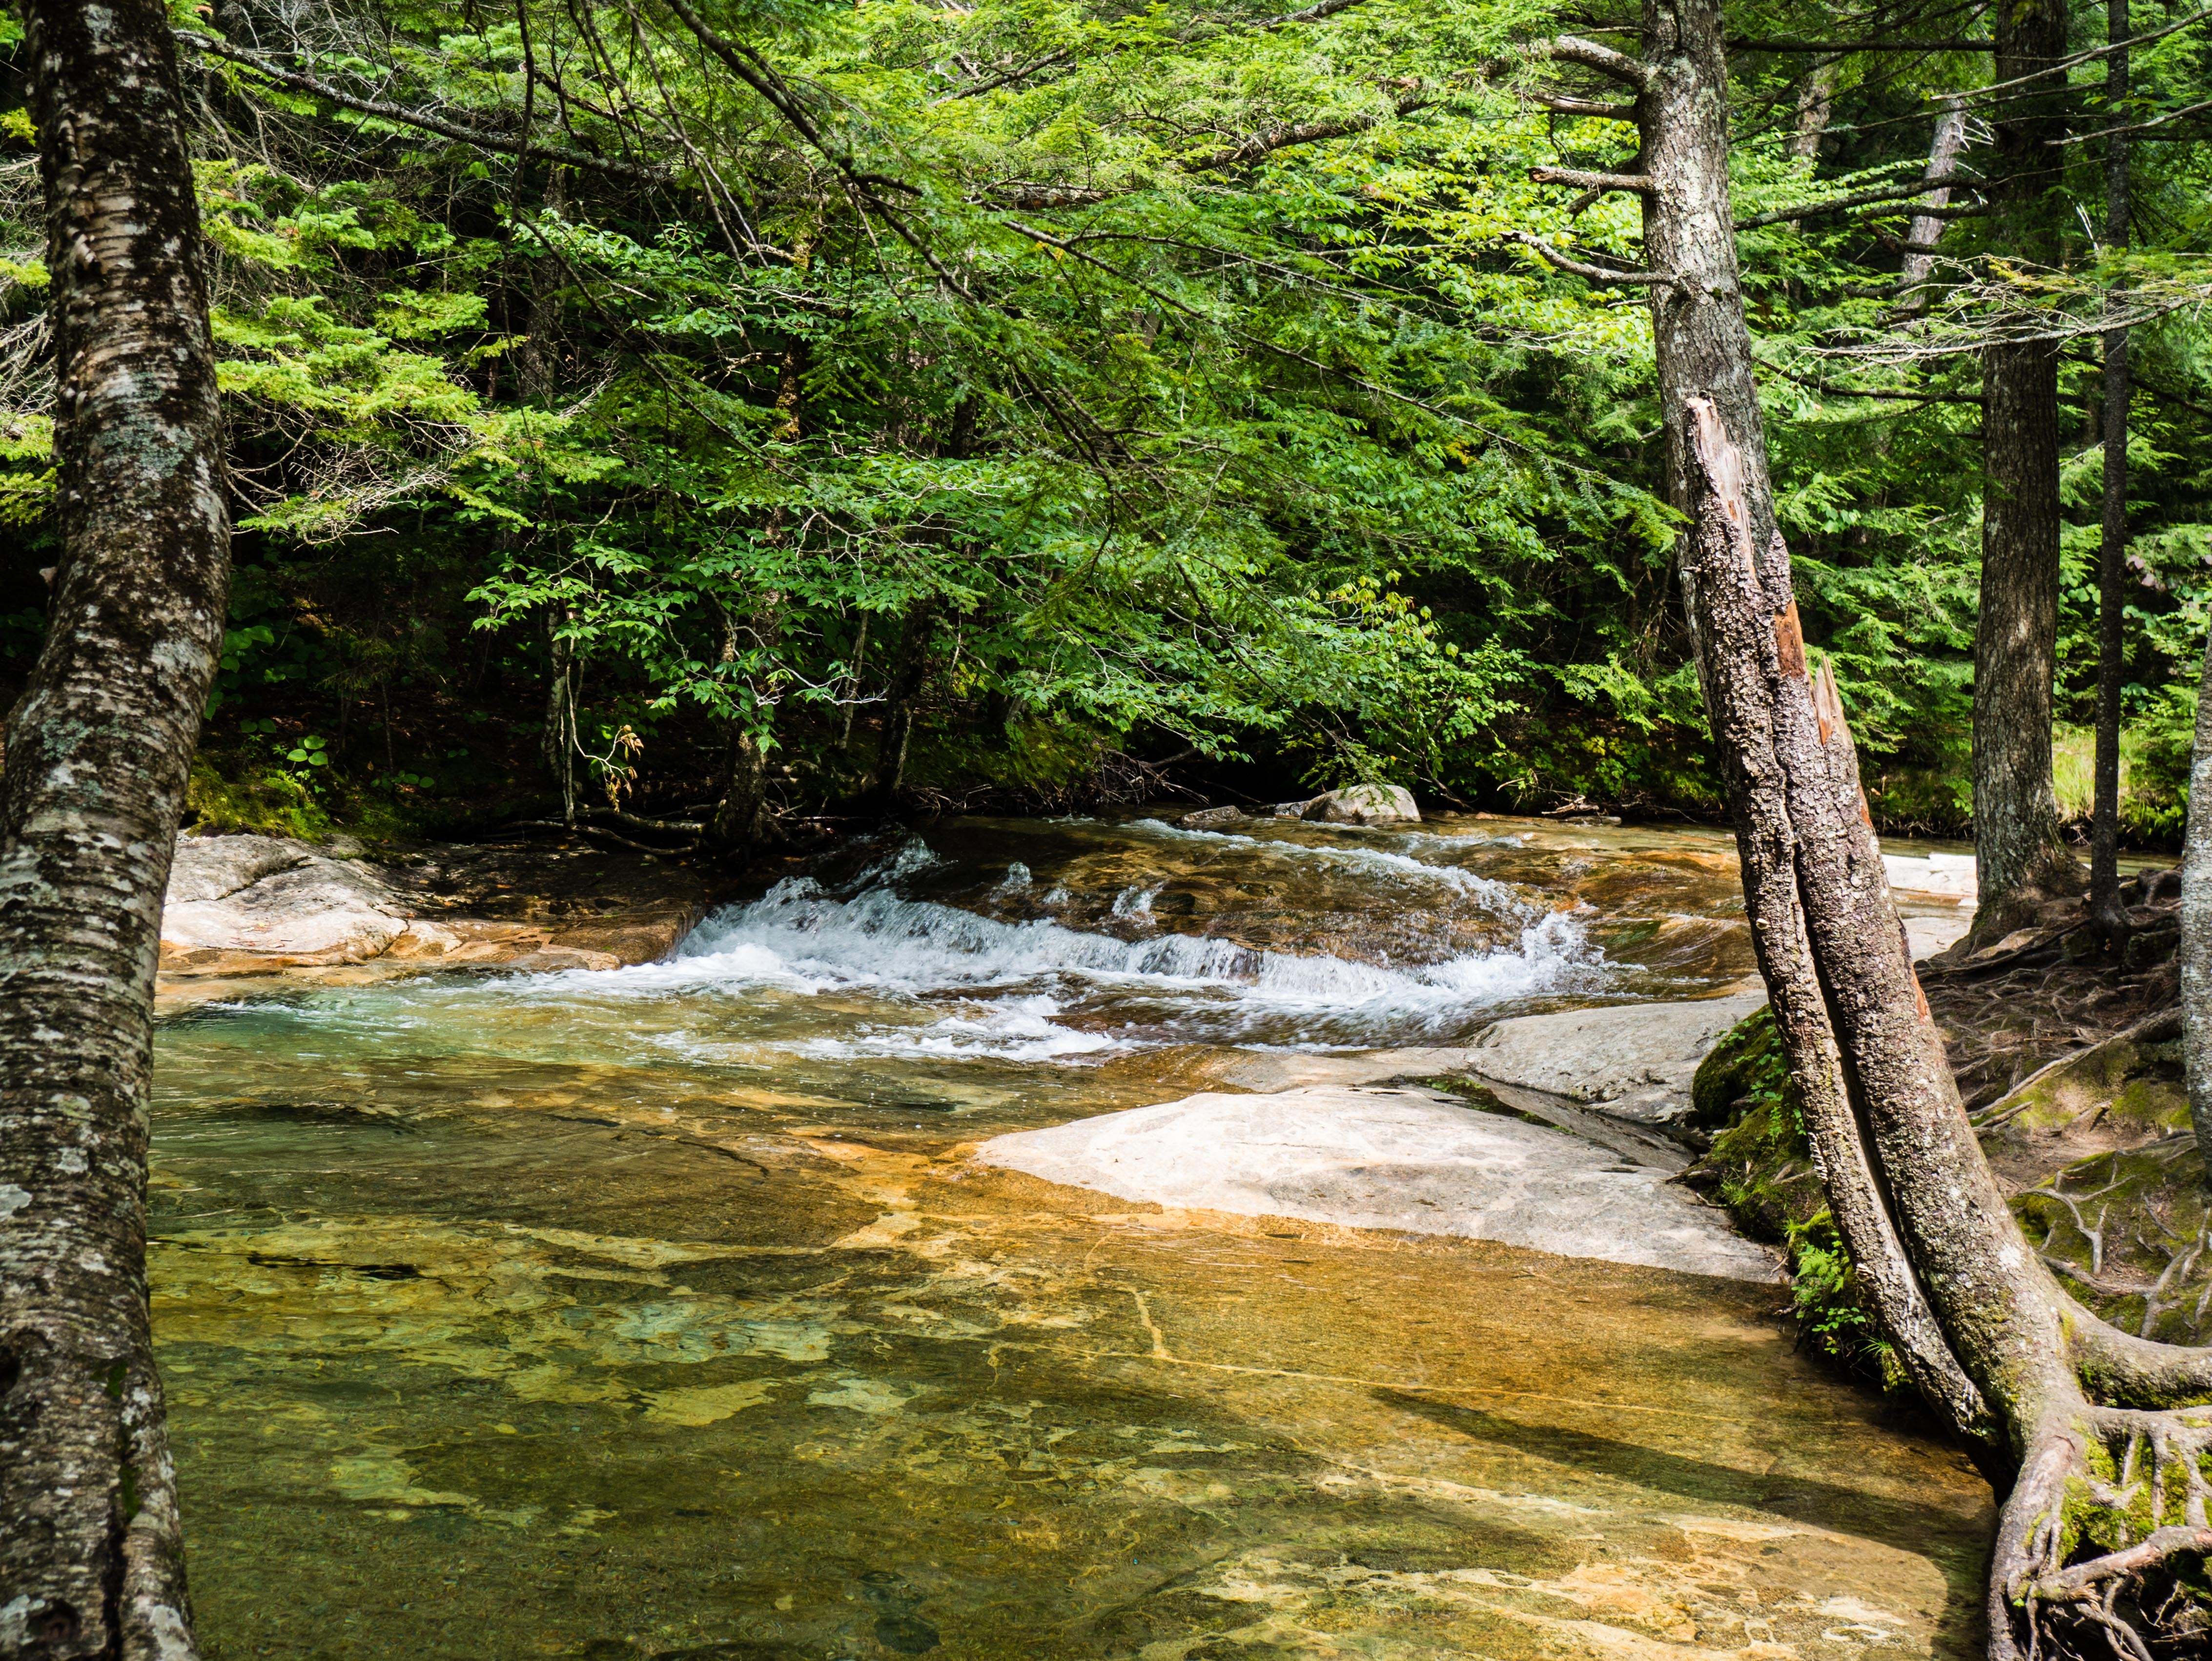 A river in Franconia Notch on the way to the Basin